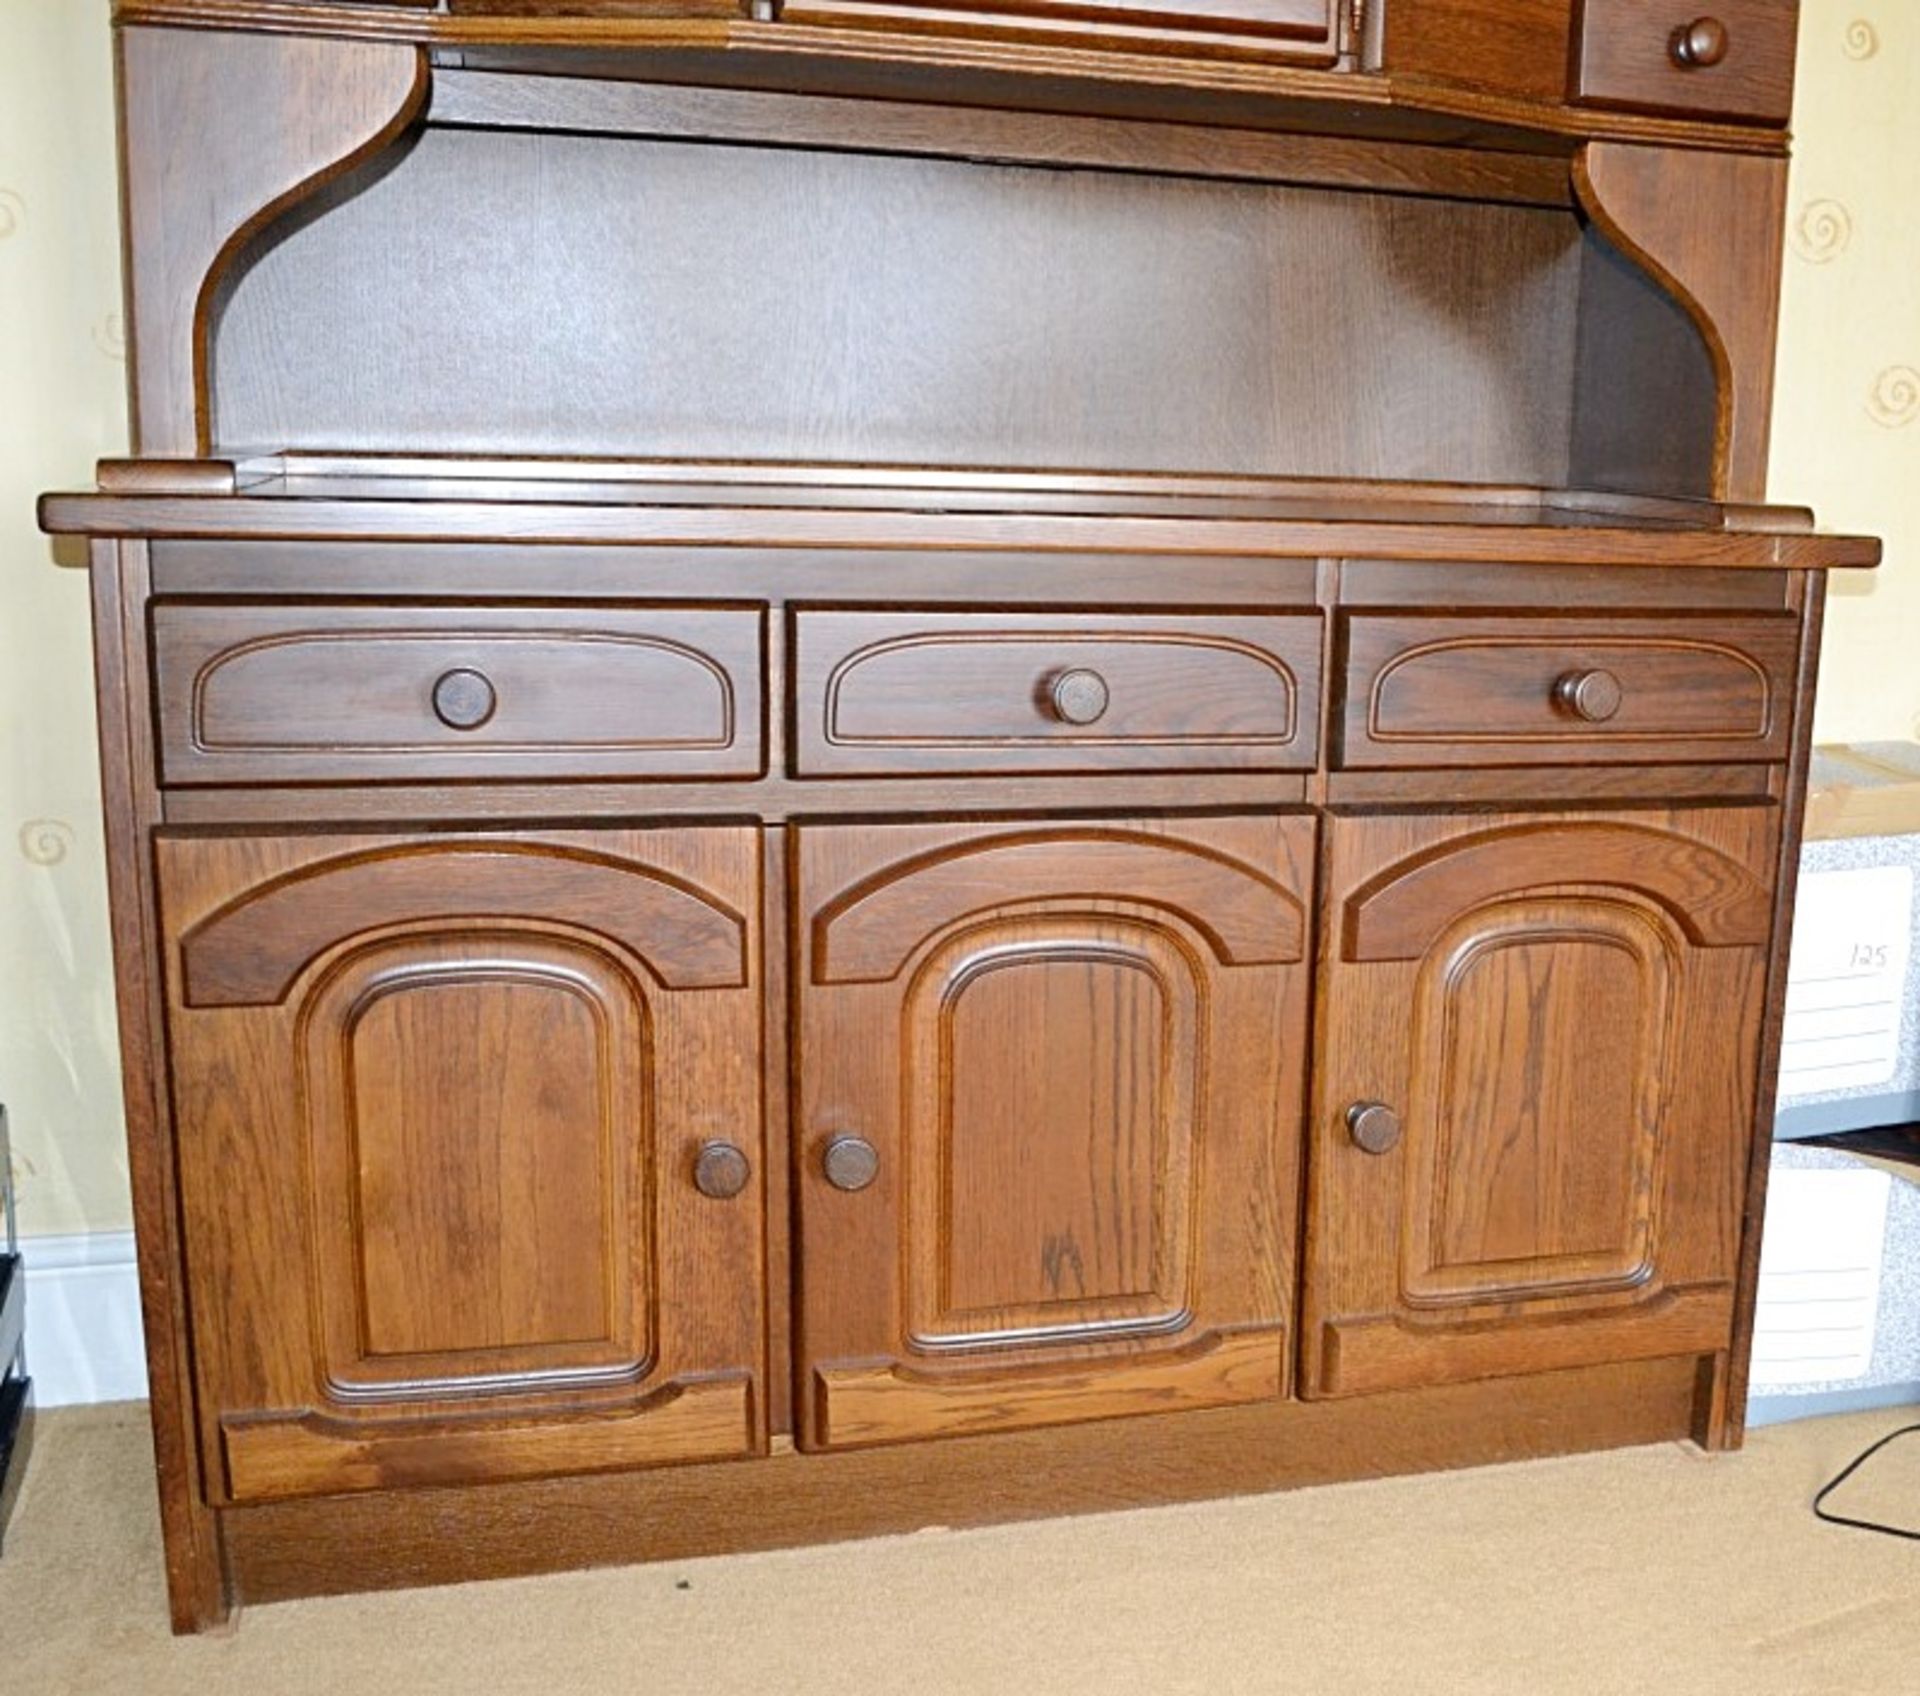 1 x Traditional Farmhouse Style Oak Dresser Unit, Offering 6-Door, 5-Drawer - W140 x H196 x - Image 4 of 9